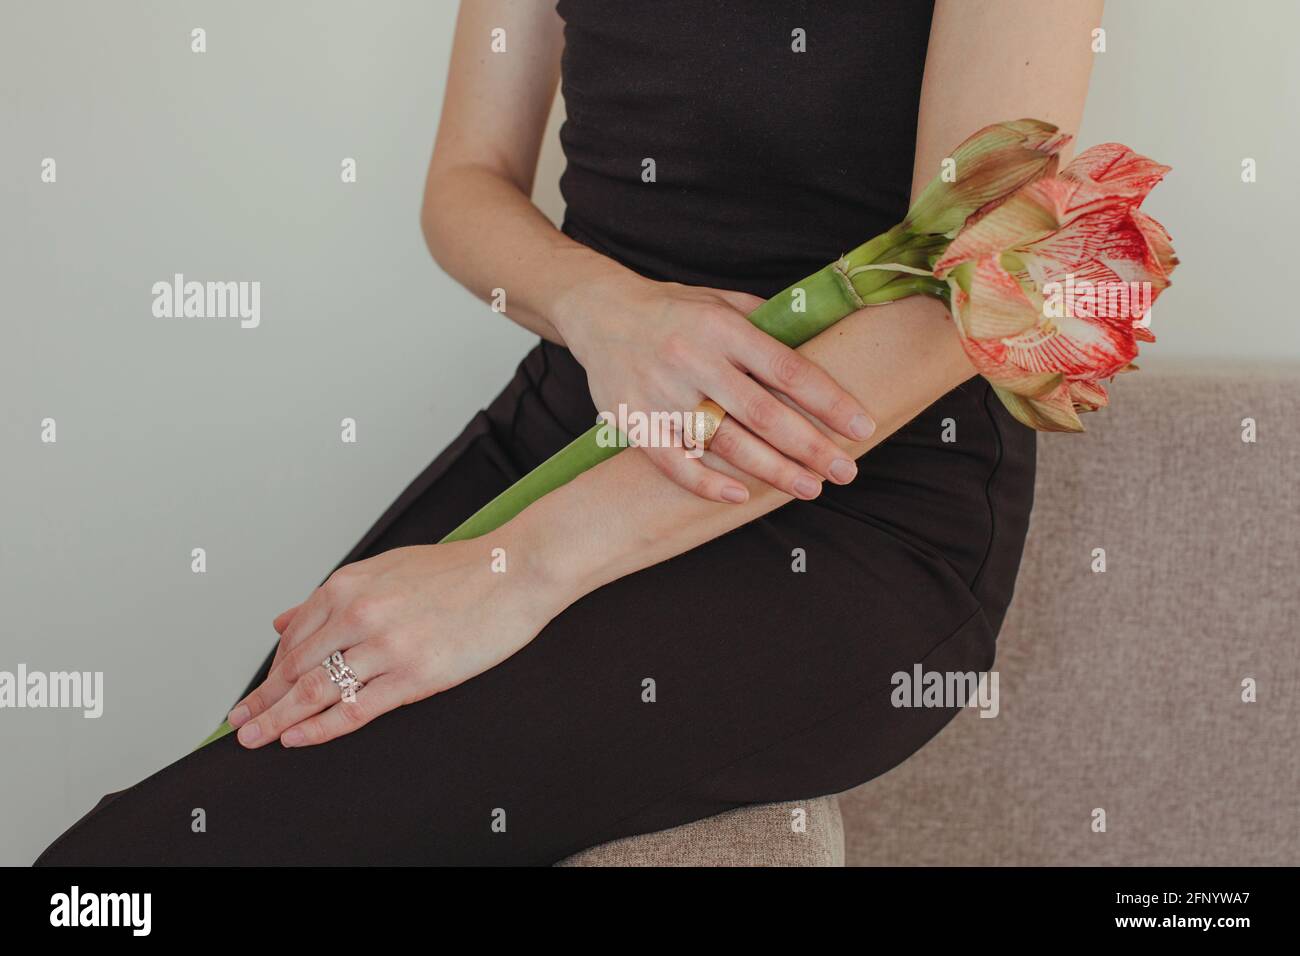 Close-up of a woman in an evening gown sitting on a sofa holding an Amaryllis flower Stock Photo